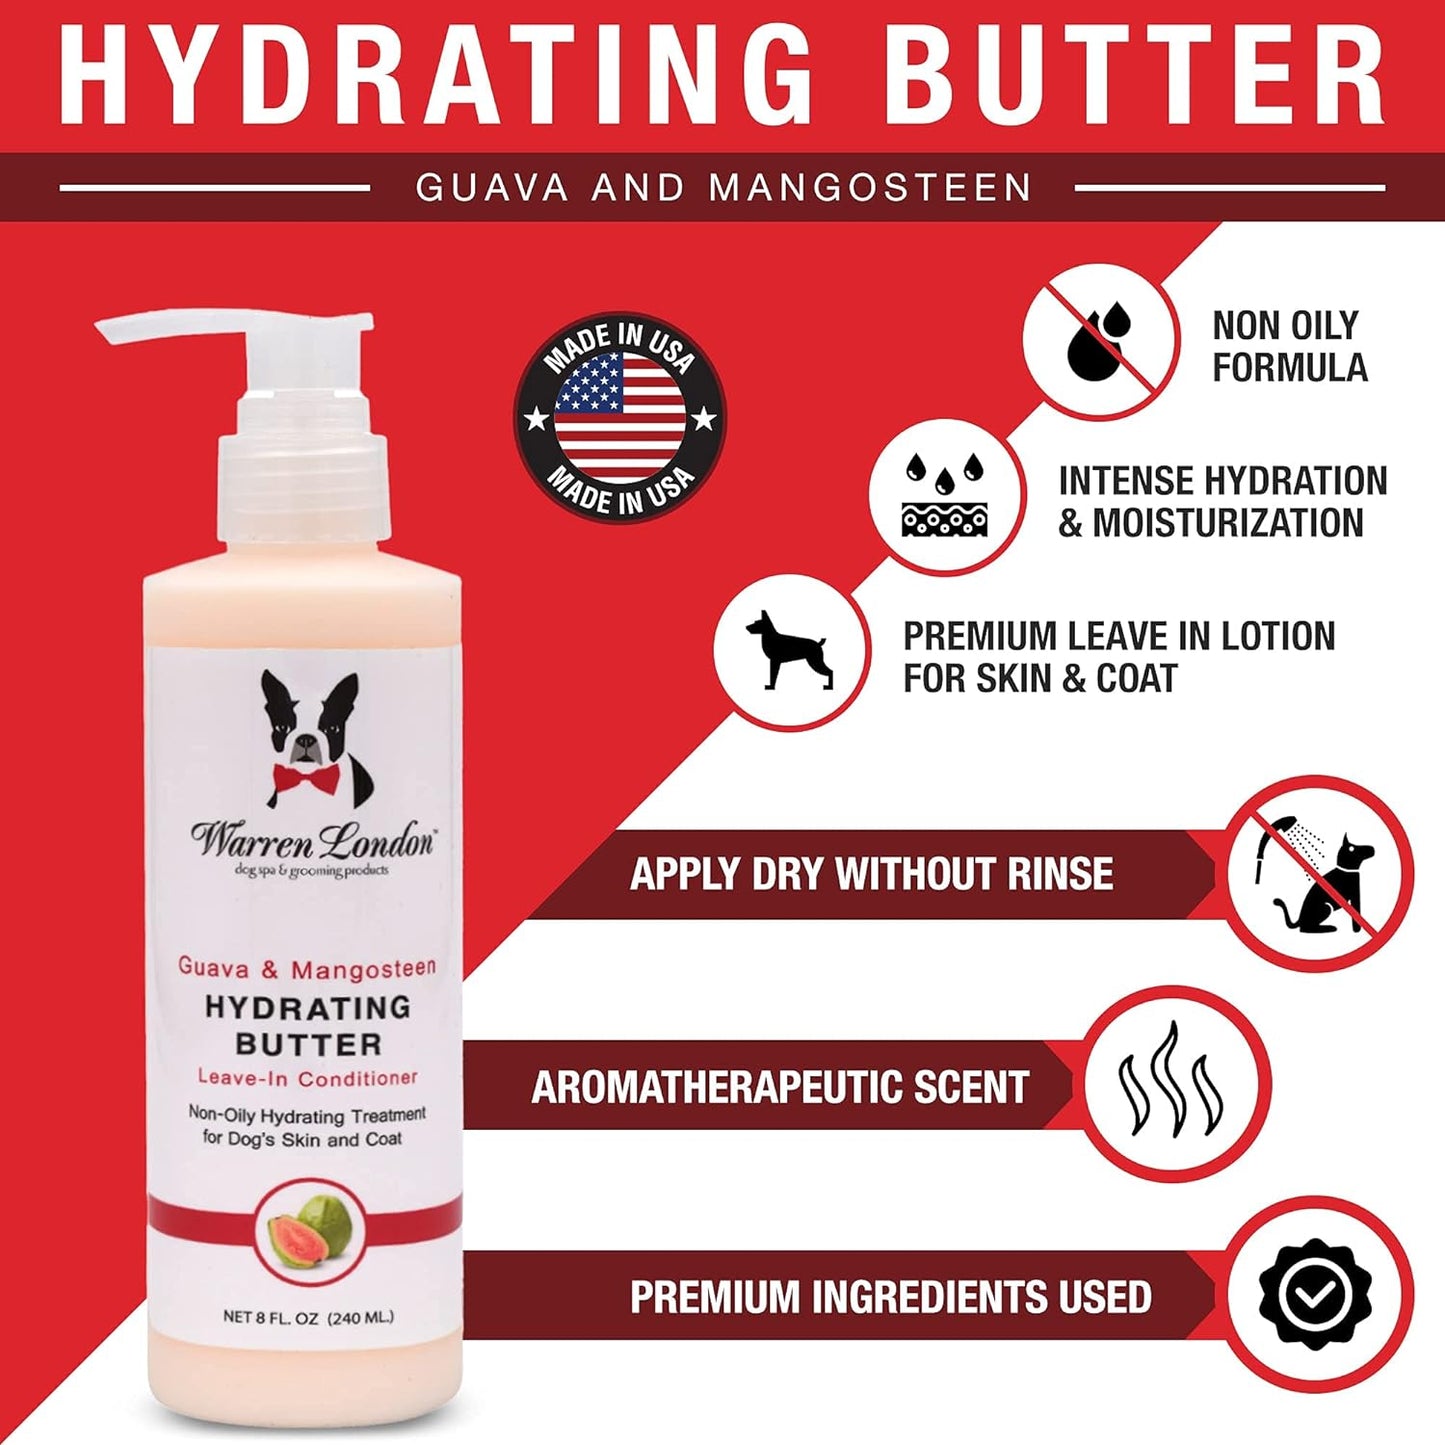 Warren London Hydrating Butter for Dogs, Guava and Mango, 8 Oz